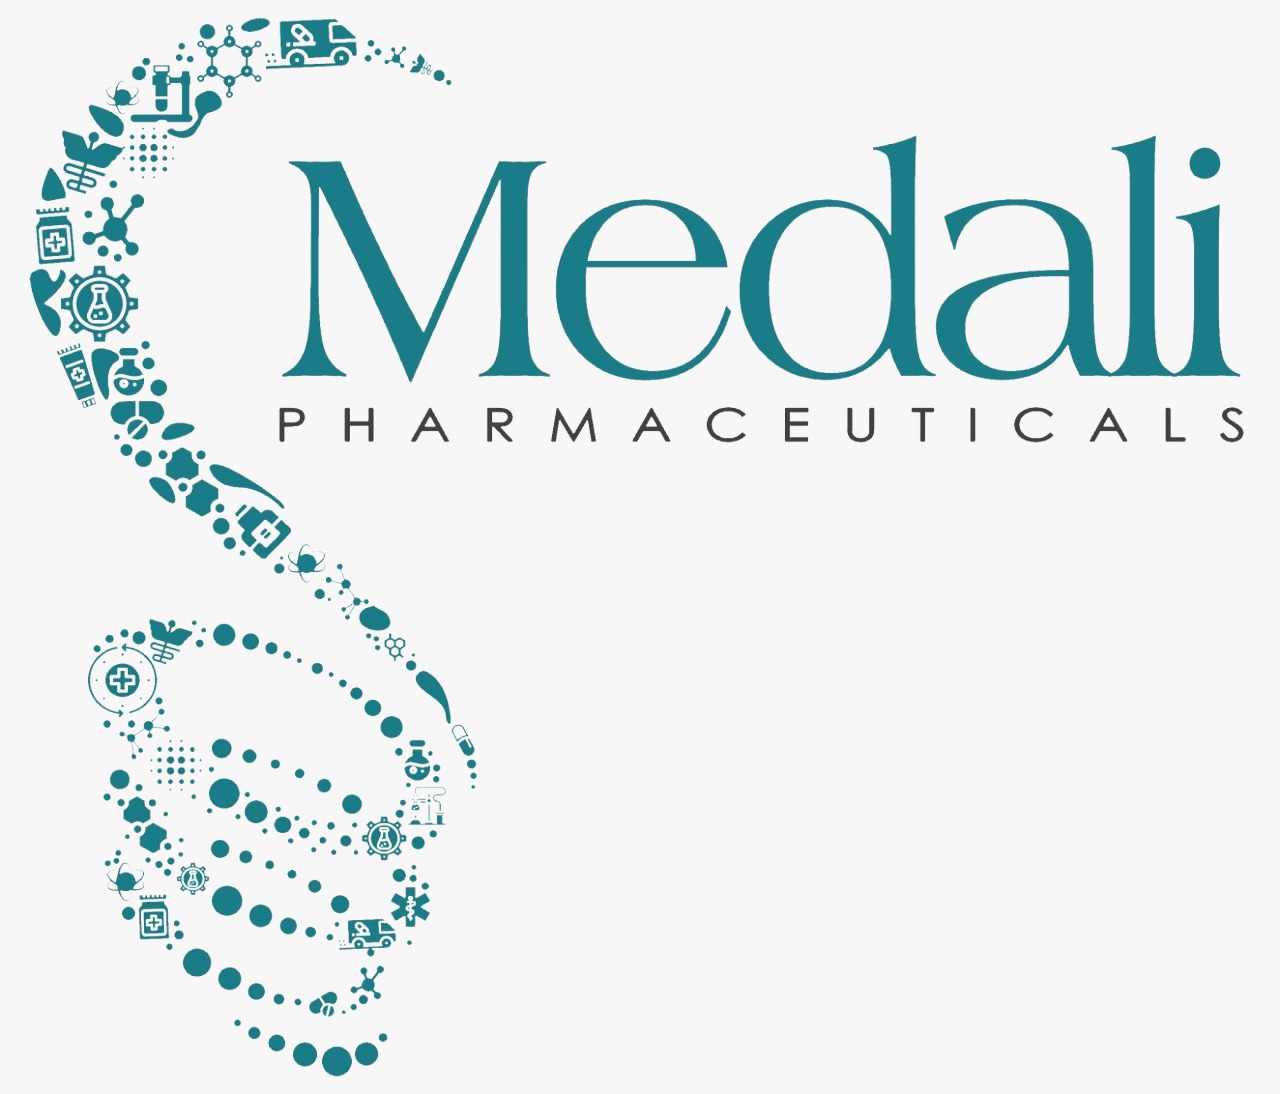 Medali for pharmaceuticals and medical industries